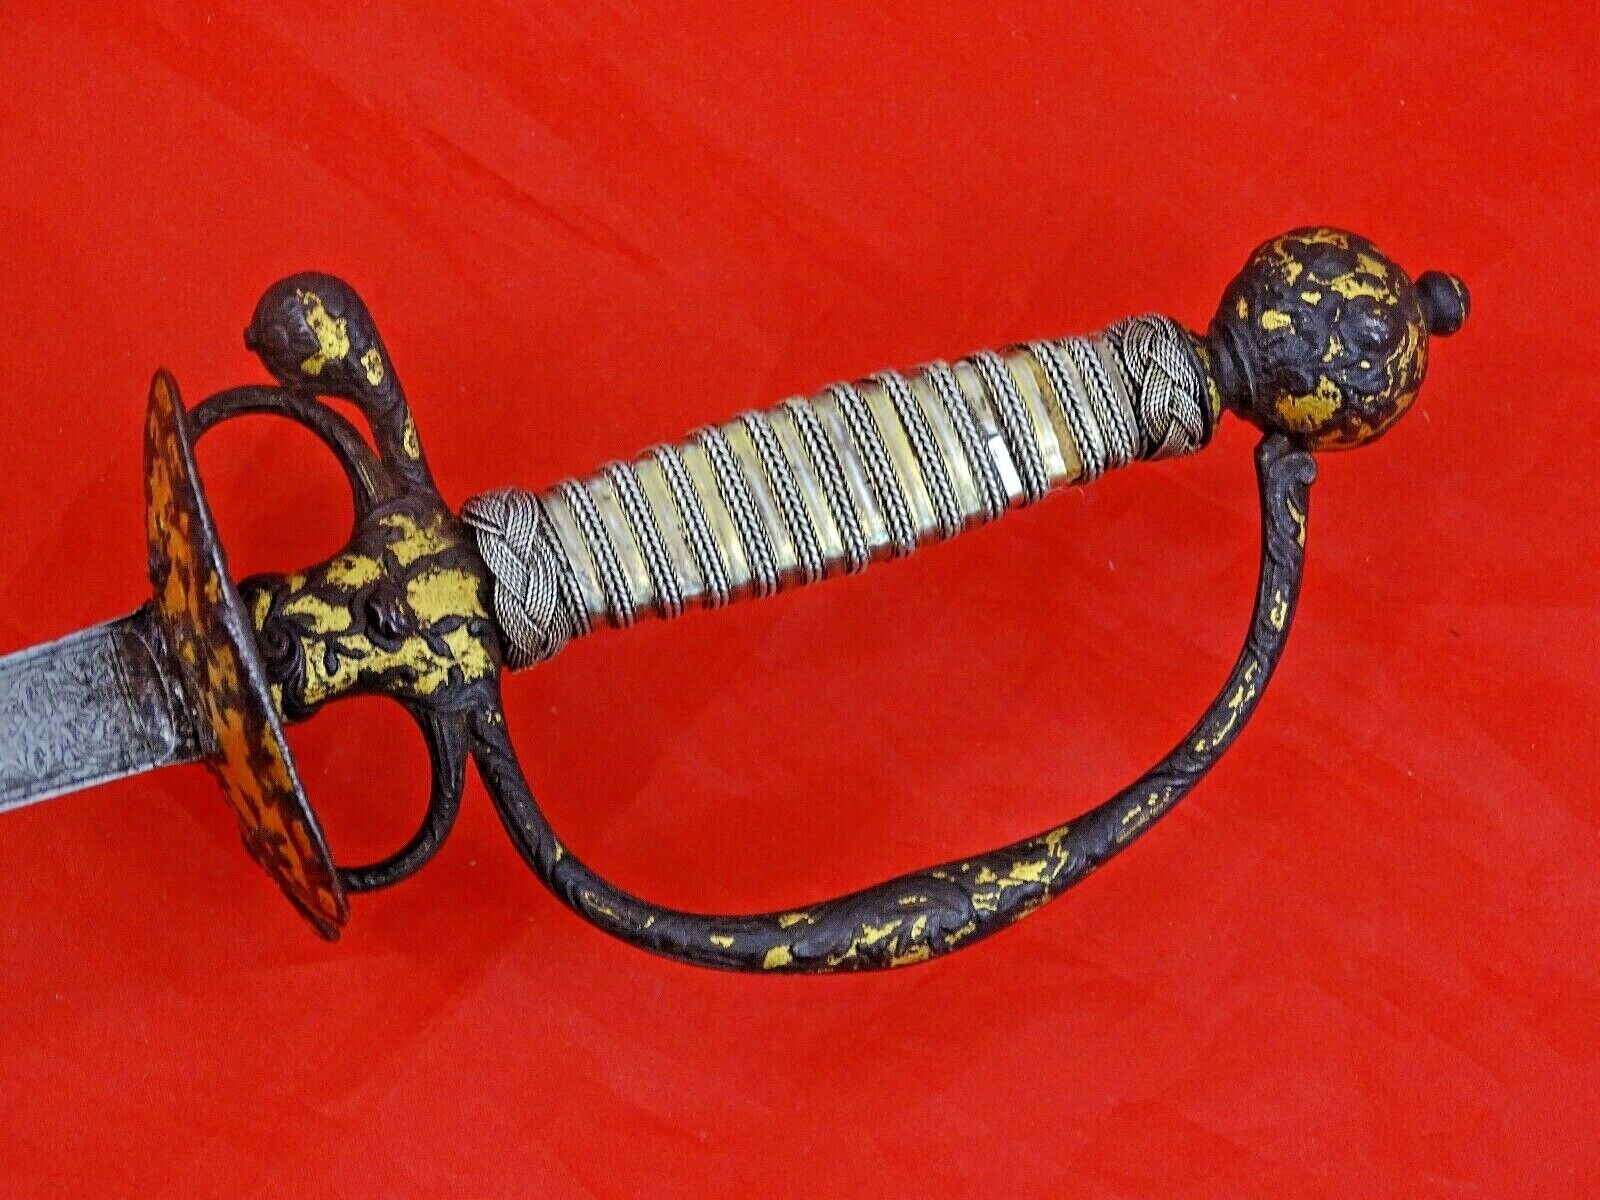 FINE ANTIQUE FRENCH SMALL / COURT SWORD EPEE GOLD DECORATED HILT 18 cent. dagger